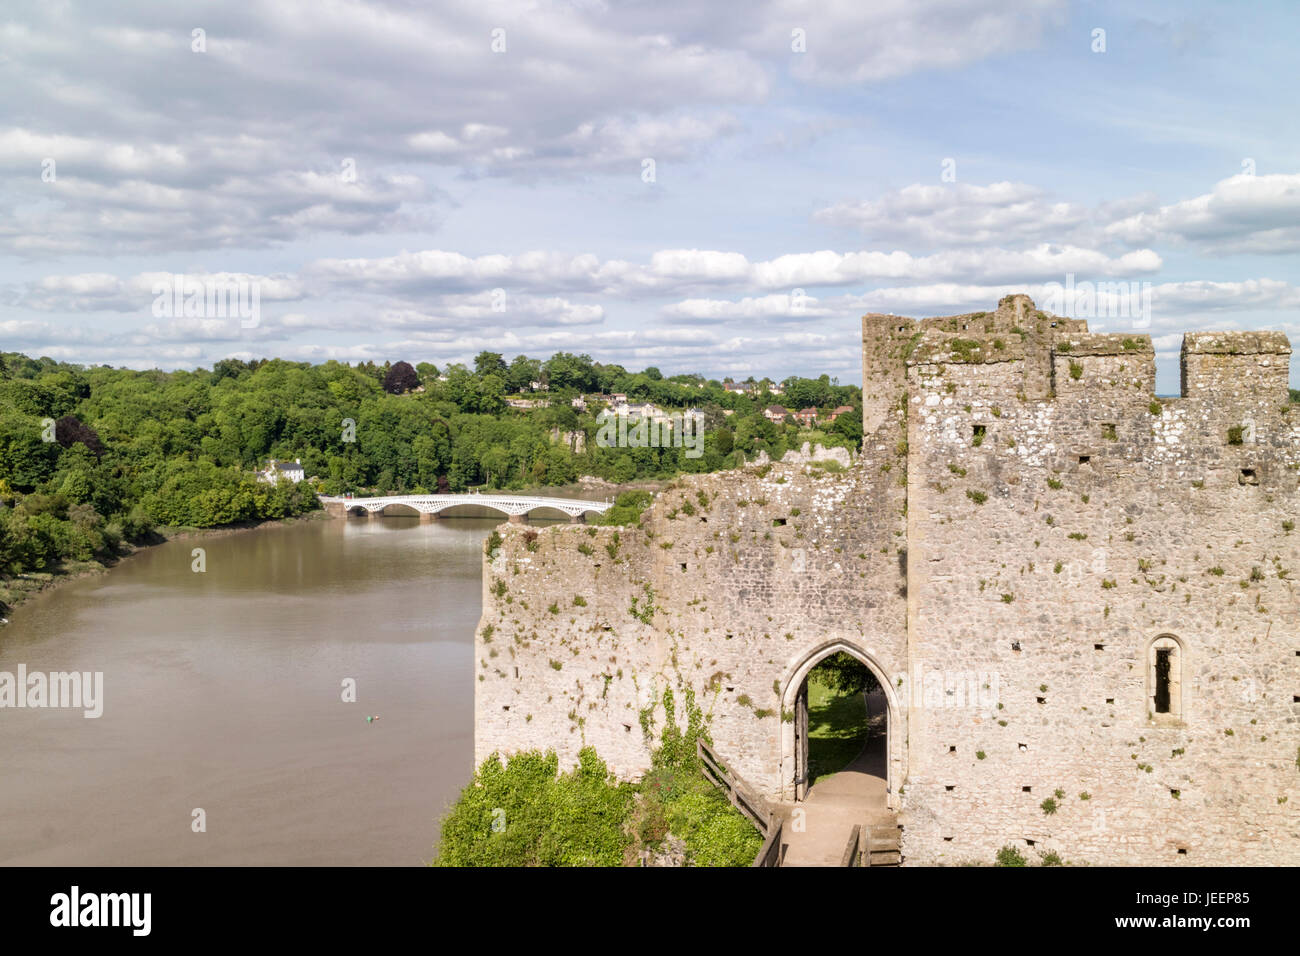 Chepstow Castle overlooking the River Wye, Chepstow, Monmouthshire, Wales, UK Stock Photo